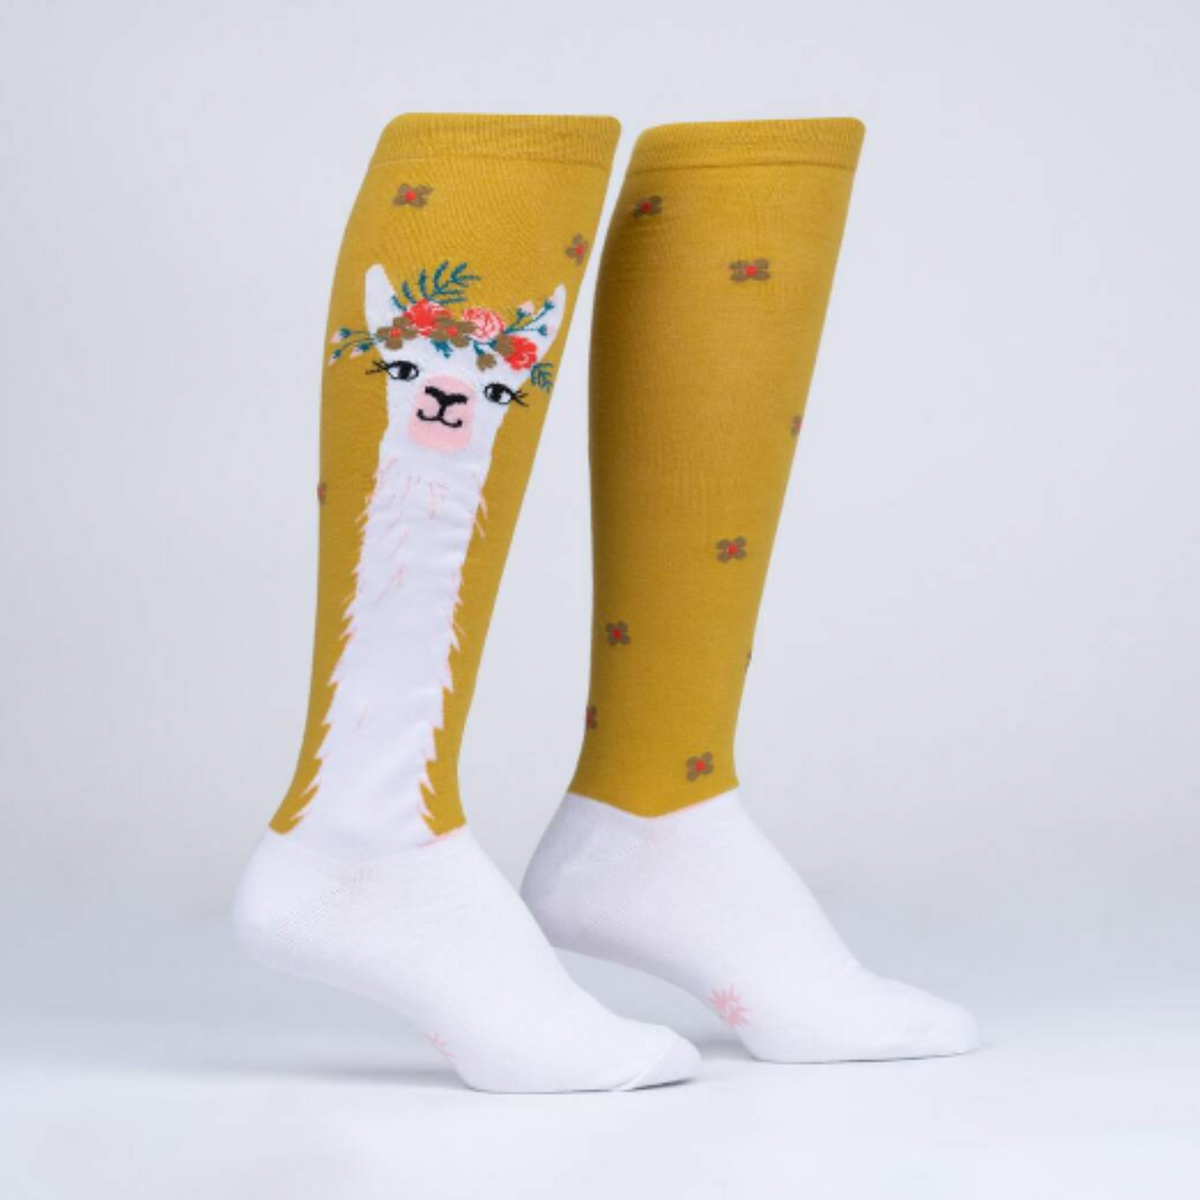 Sock It To Me Llama Queen women&#39;s sock featuring goldenrod knee high sock with white llama wearing a floral crown. Socks shown on display feet from side. 